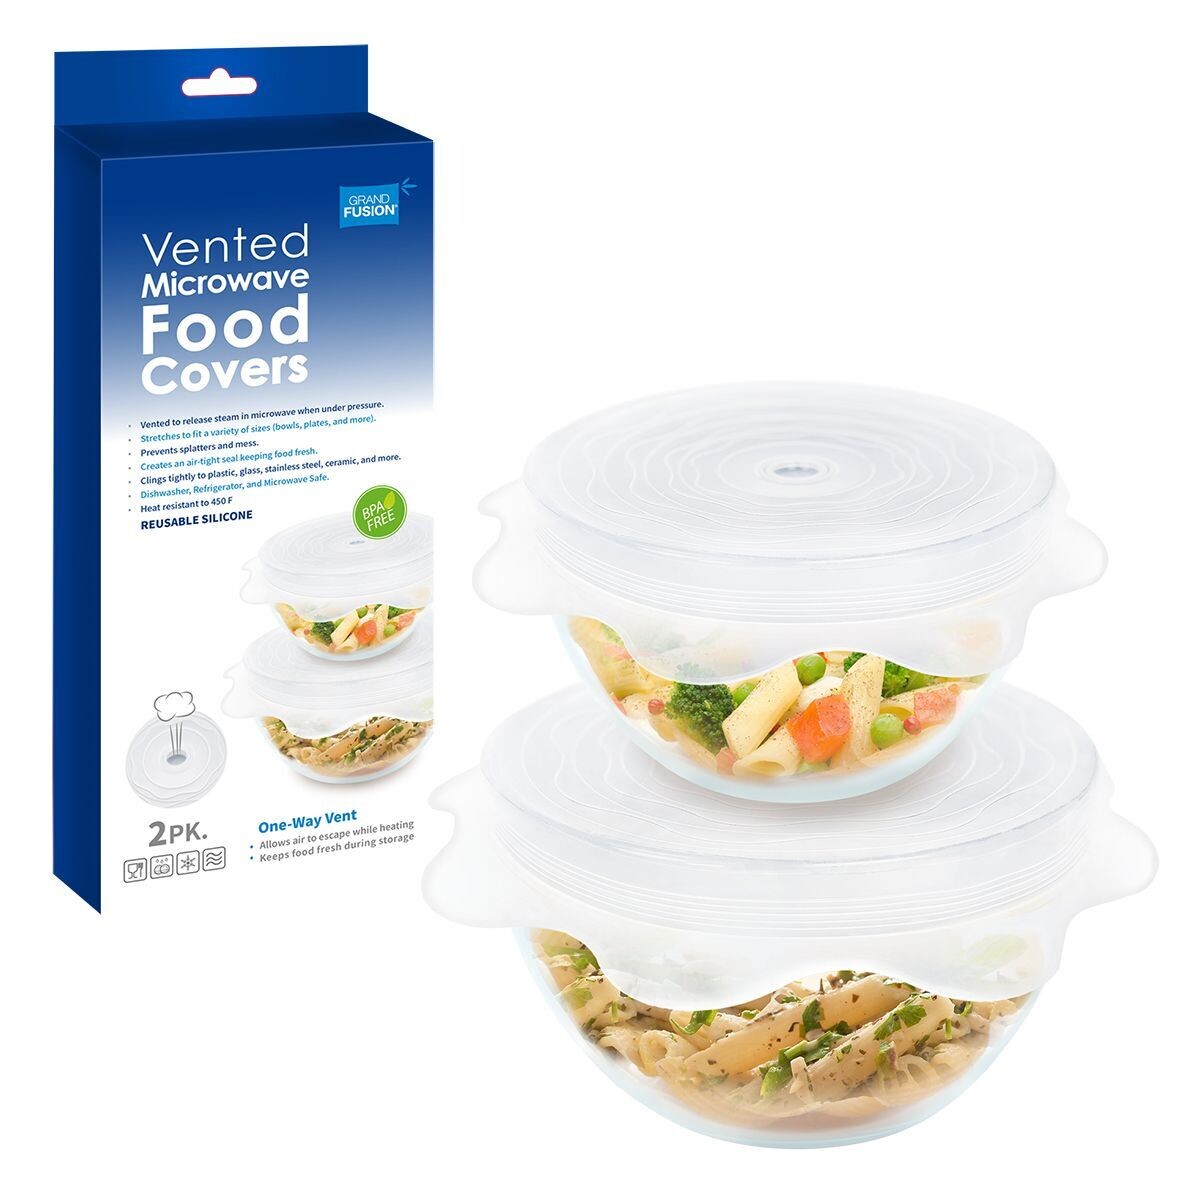 Grand Fusion Vented Microwave Food Covers